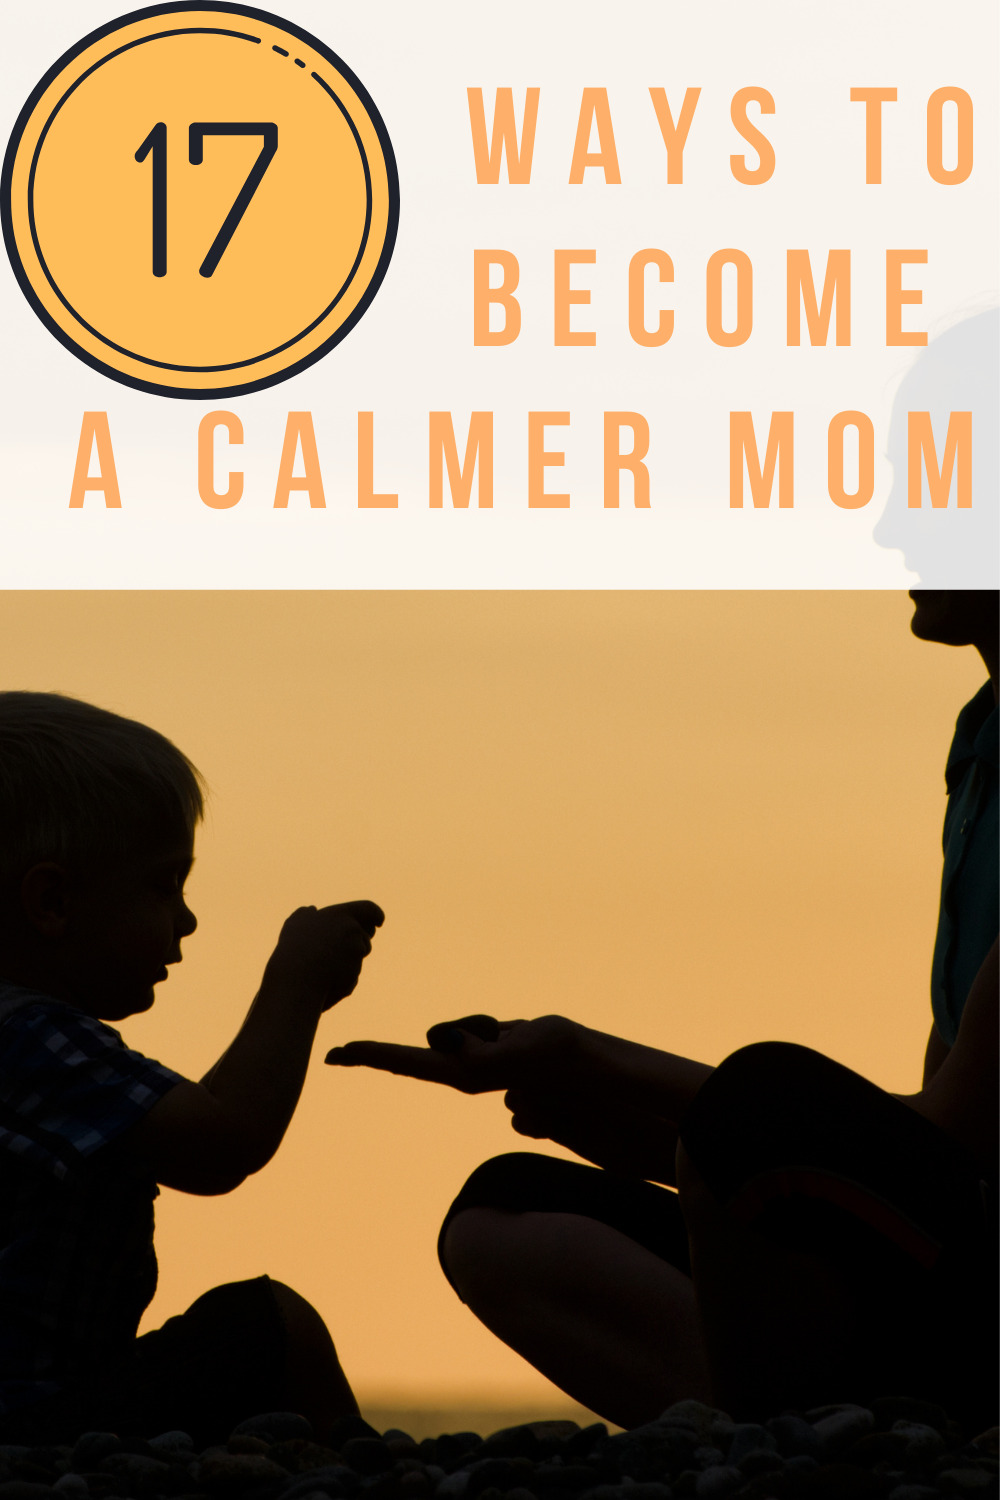 becoming a calmer mom - mom playing with her child